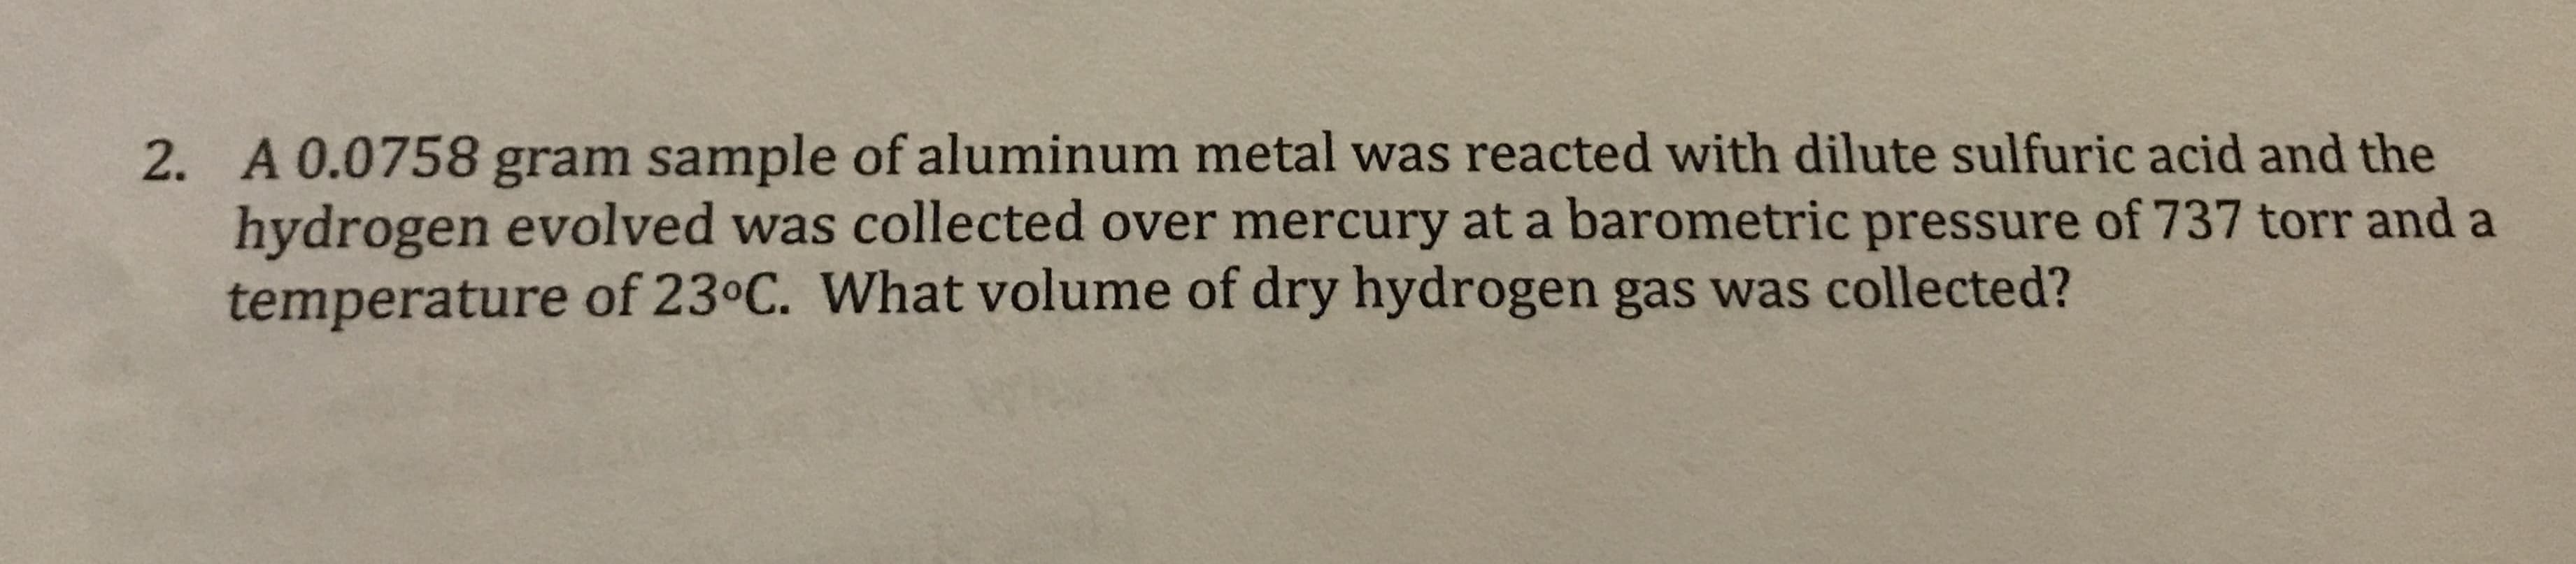 2. A 0.0758 gram sample of aluminum metal was reacted with dilute sulfuric acid and the
hydrogen evolved was collected over mercury at a barometric pressure of 737 torr and a
temperature of 230C. What volume of dry hydrogen gas was collected?
